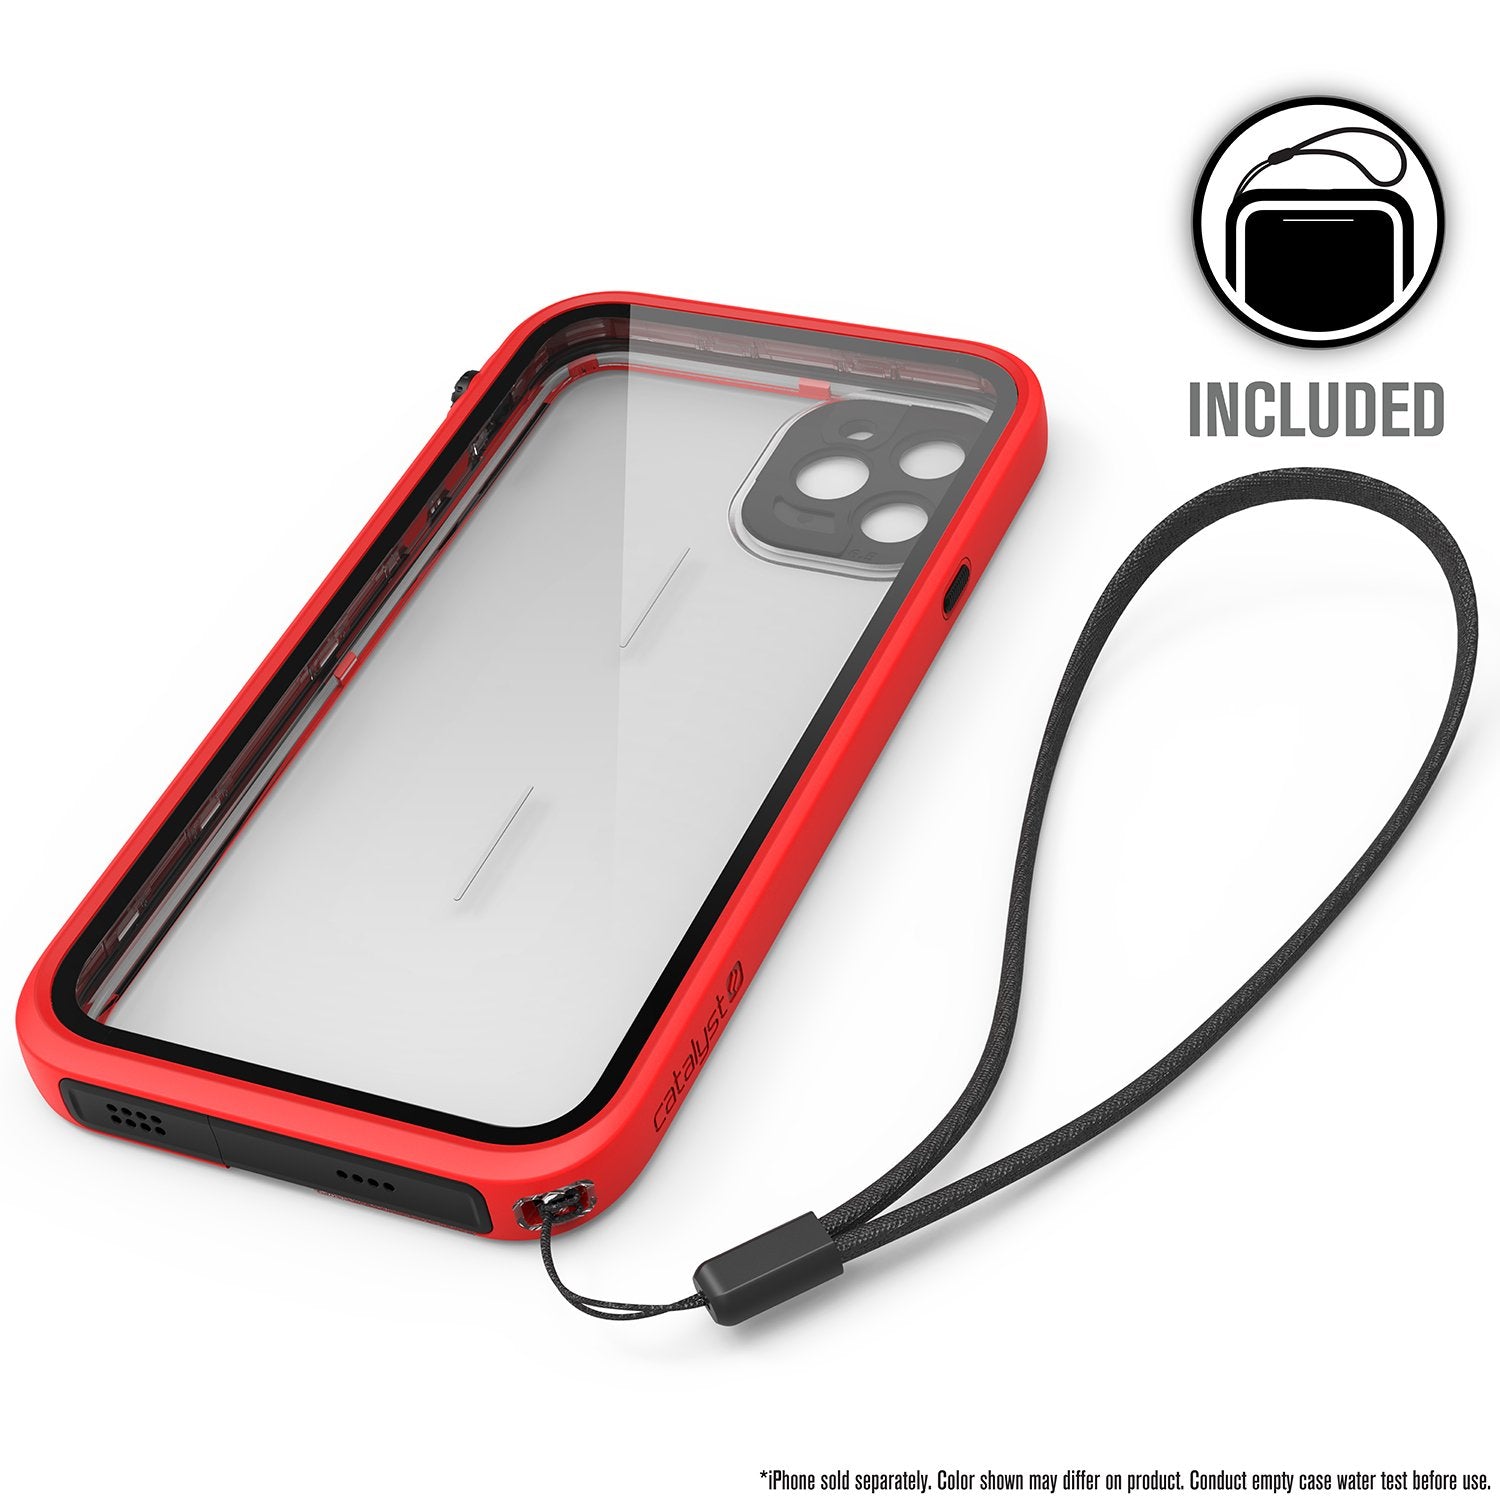 Catalyst iphone 11 pro max waterproof case showing the back of the case with lanyard attached in flame red colorway